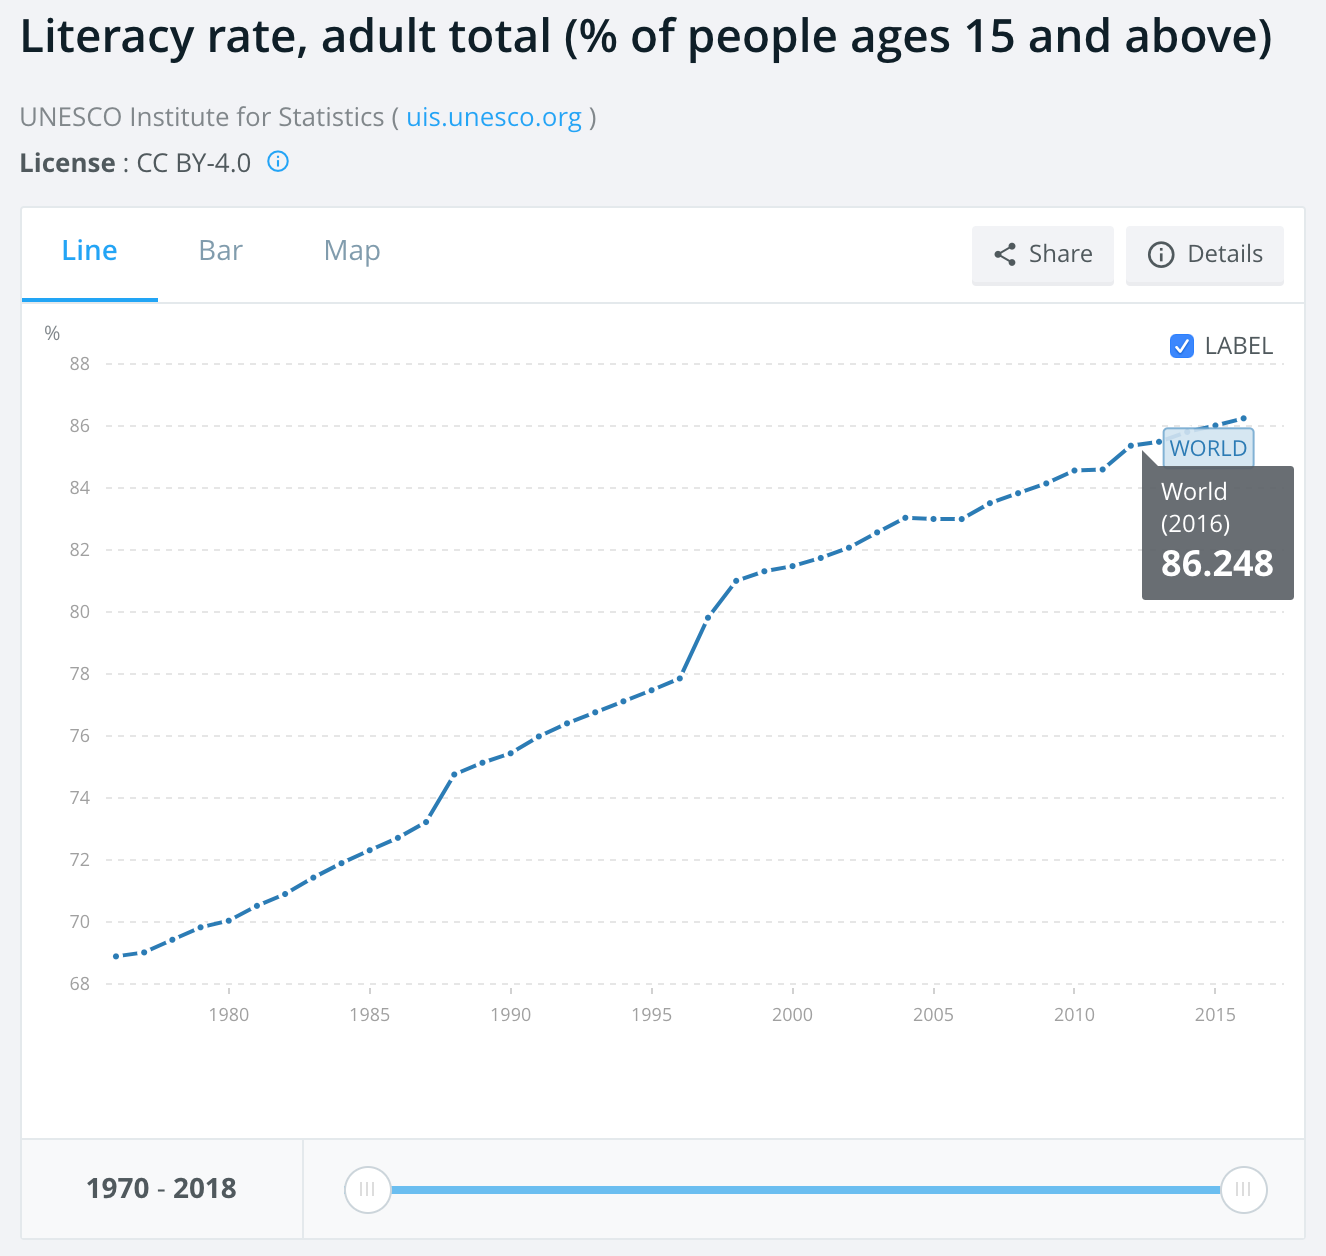 Literacy rate graph for adults above 15 years old